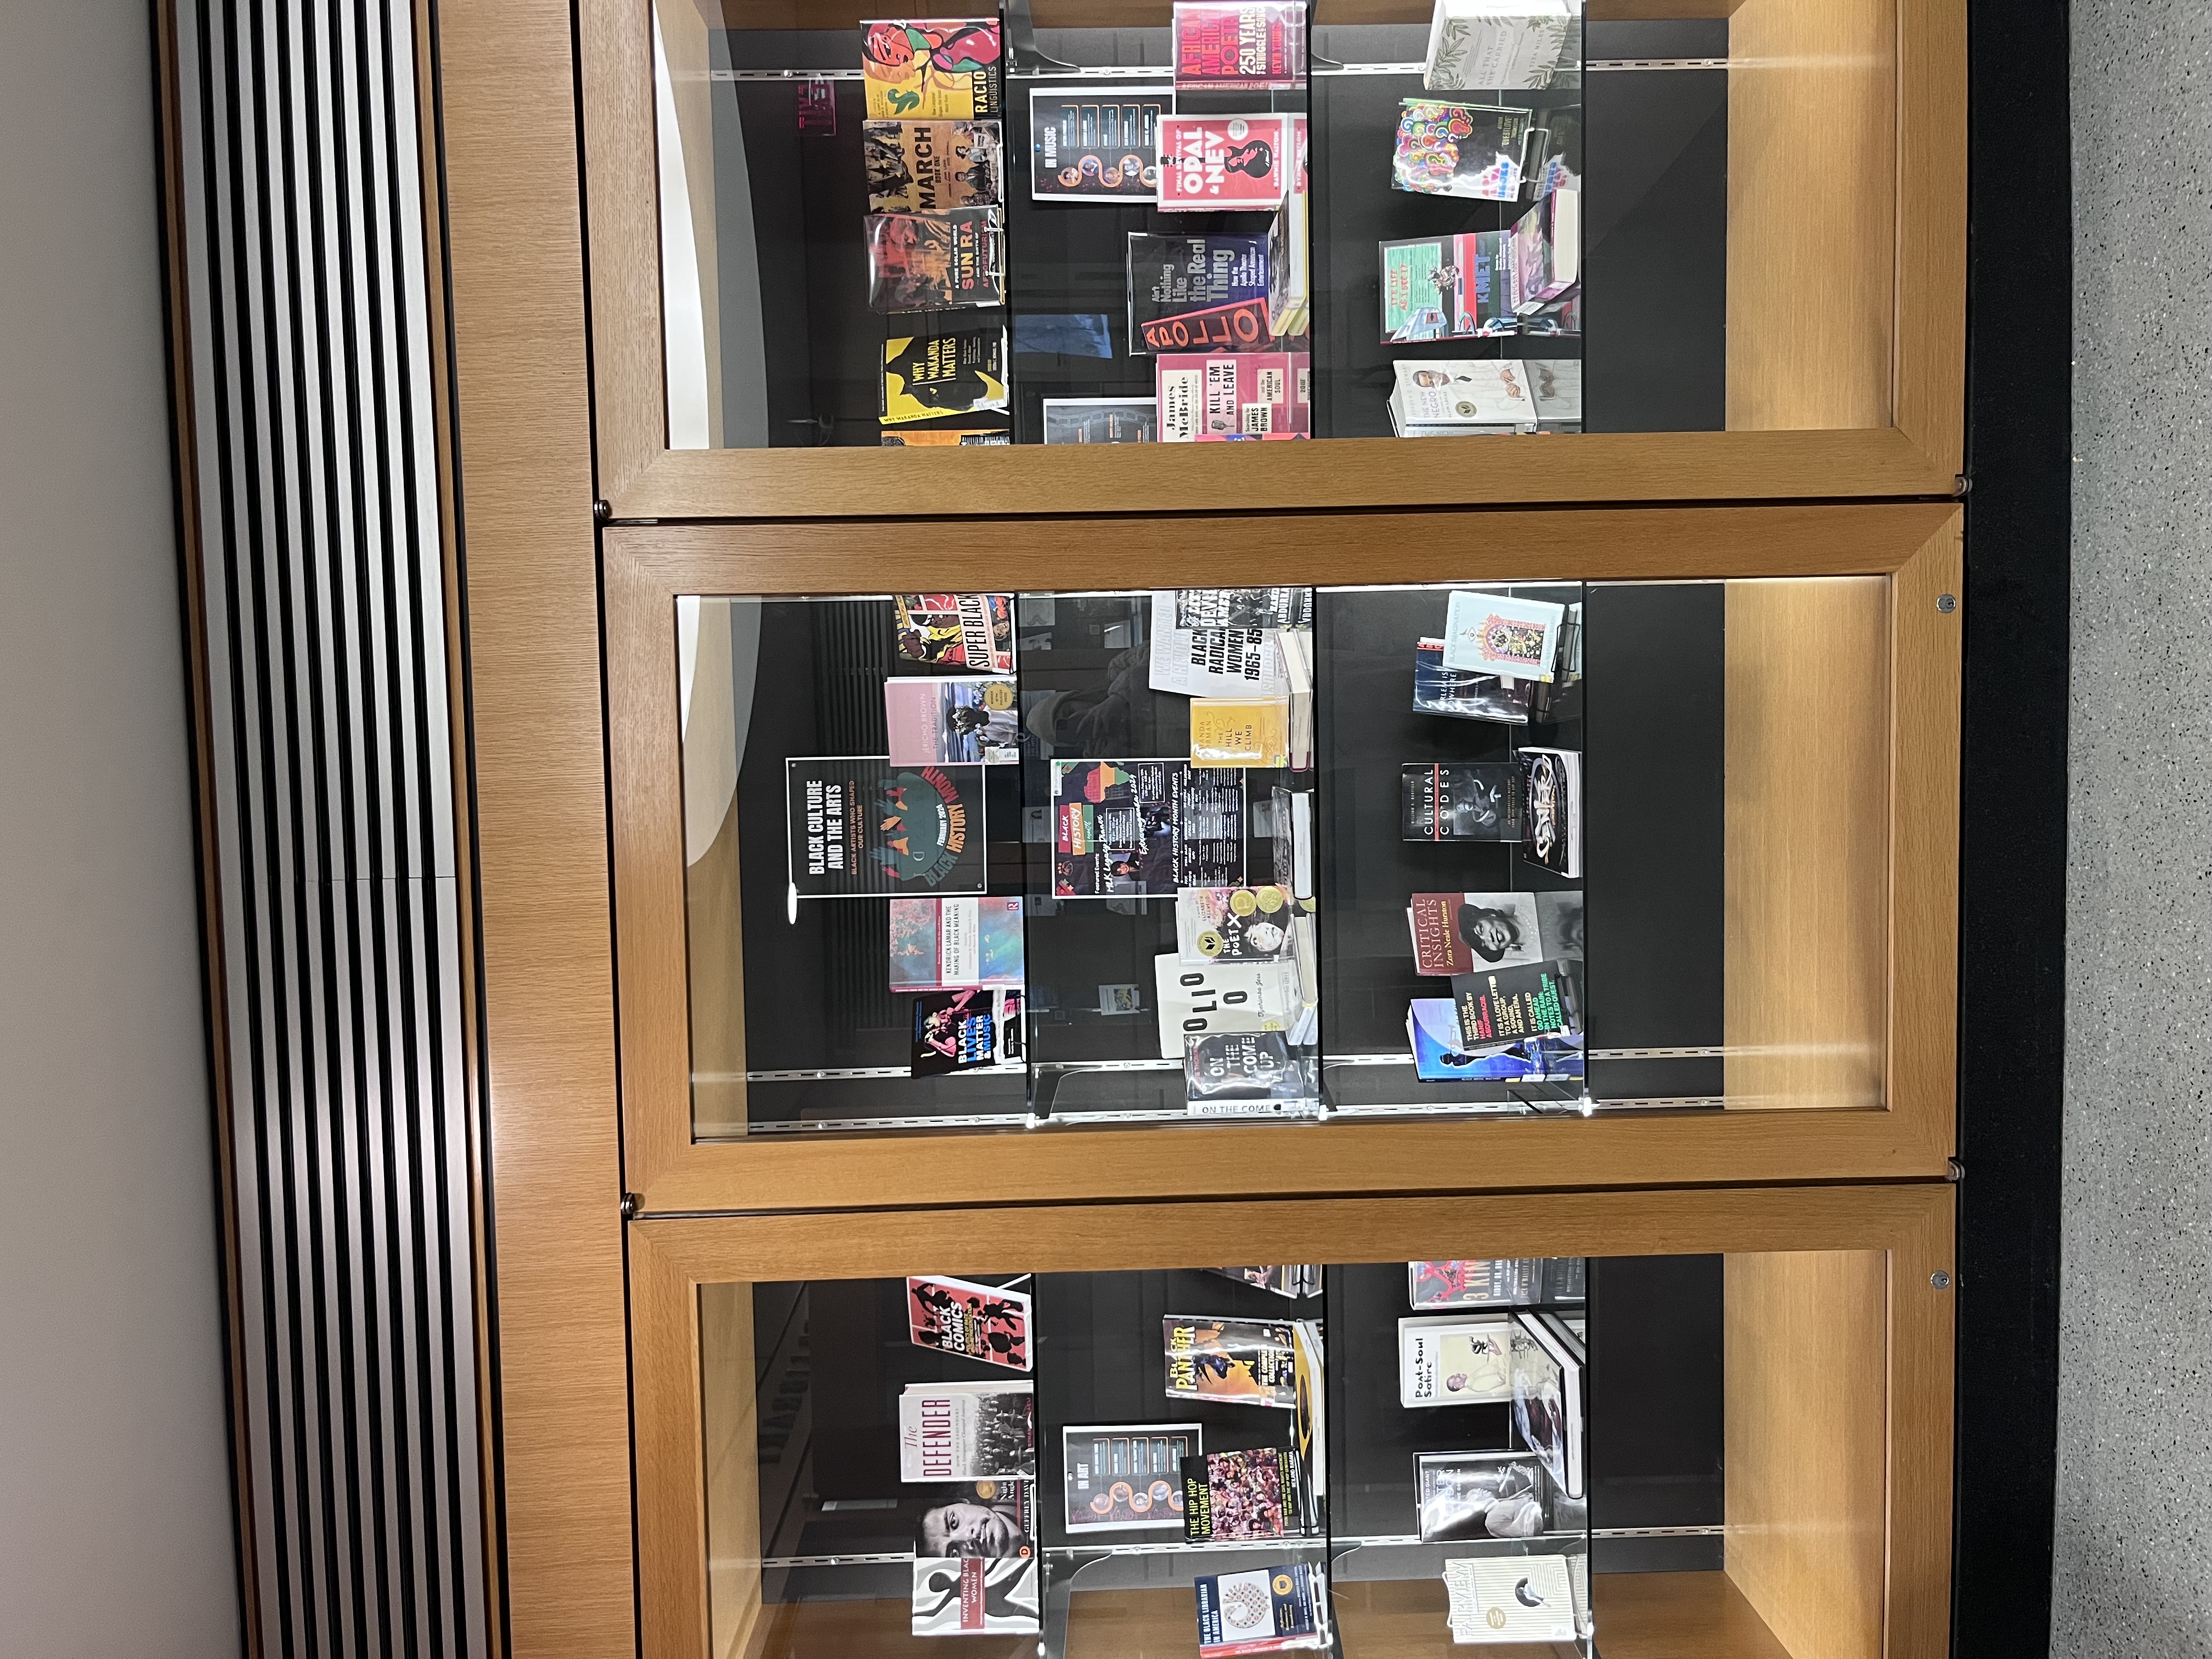 Photograph of Black culture and arts books in the exhibit case